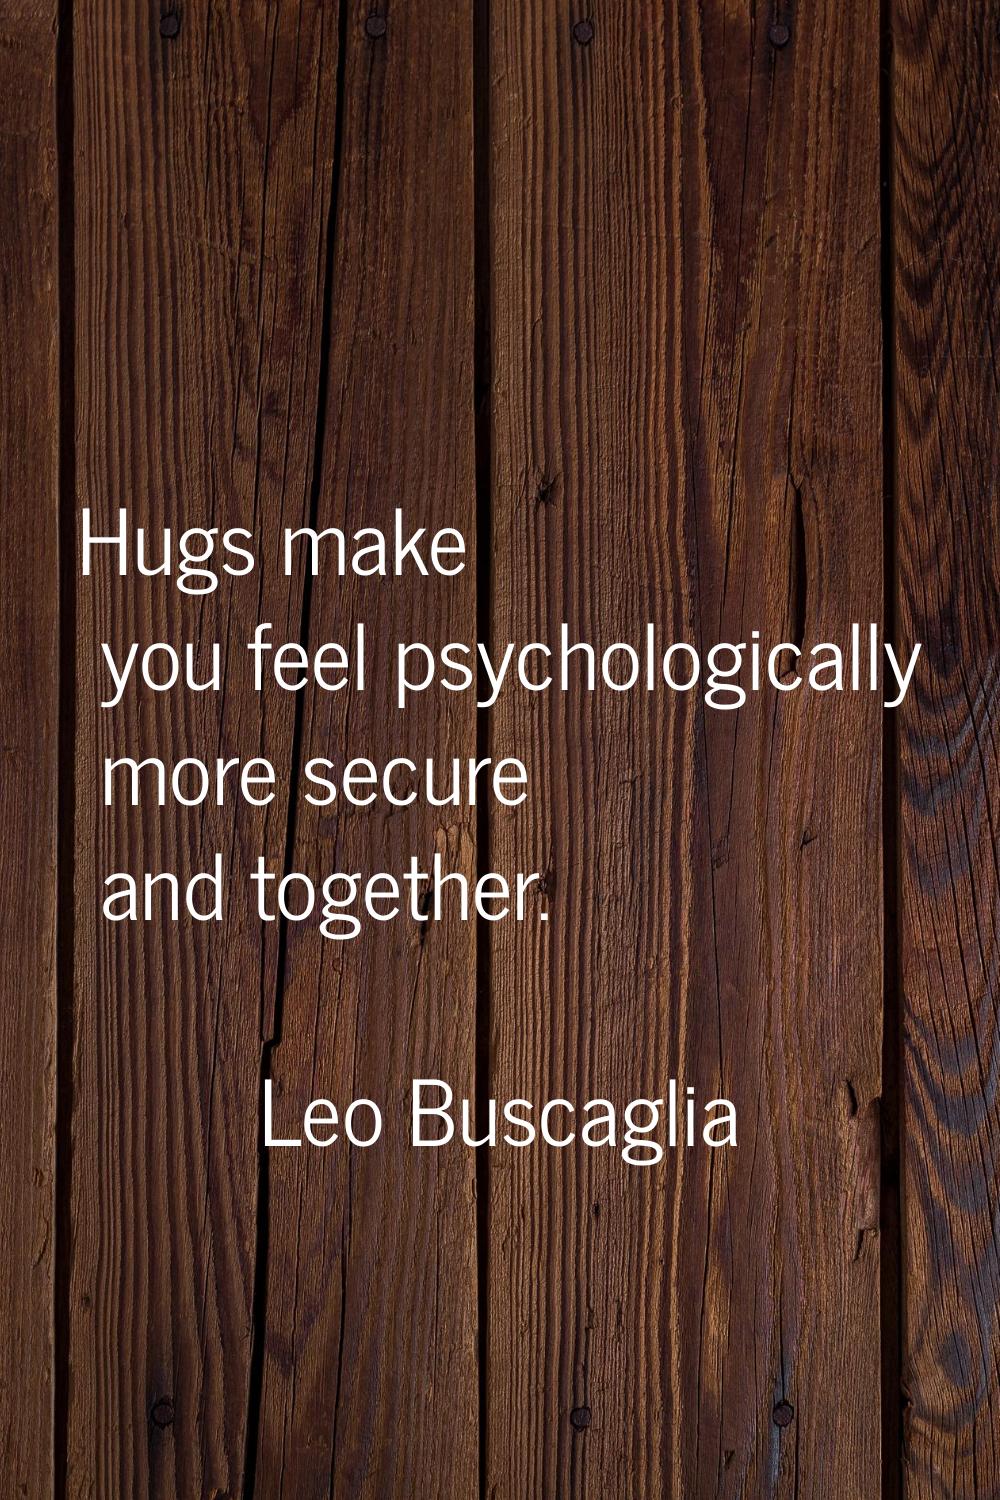 Hugs make you feel psychologically more secure and together.